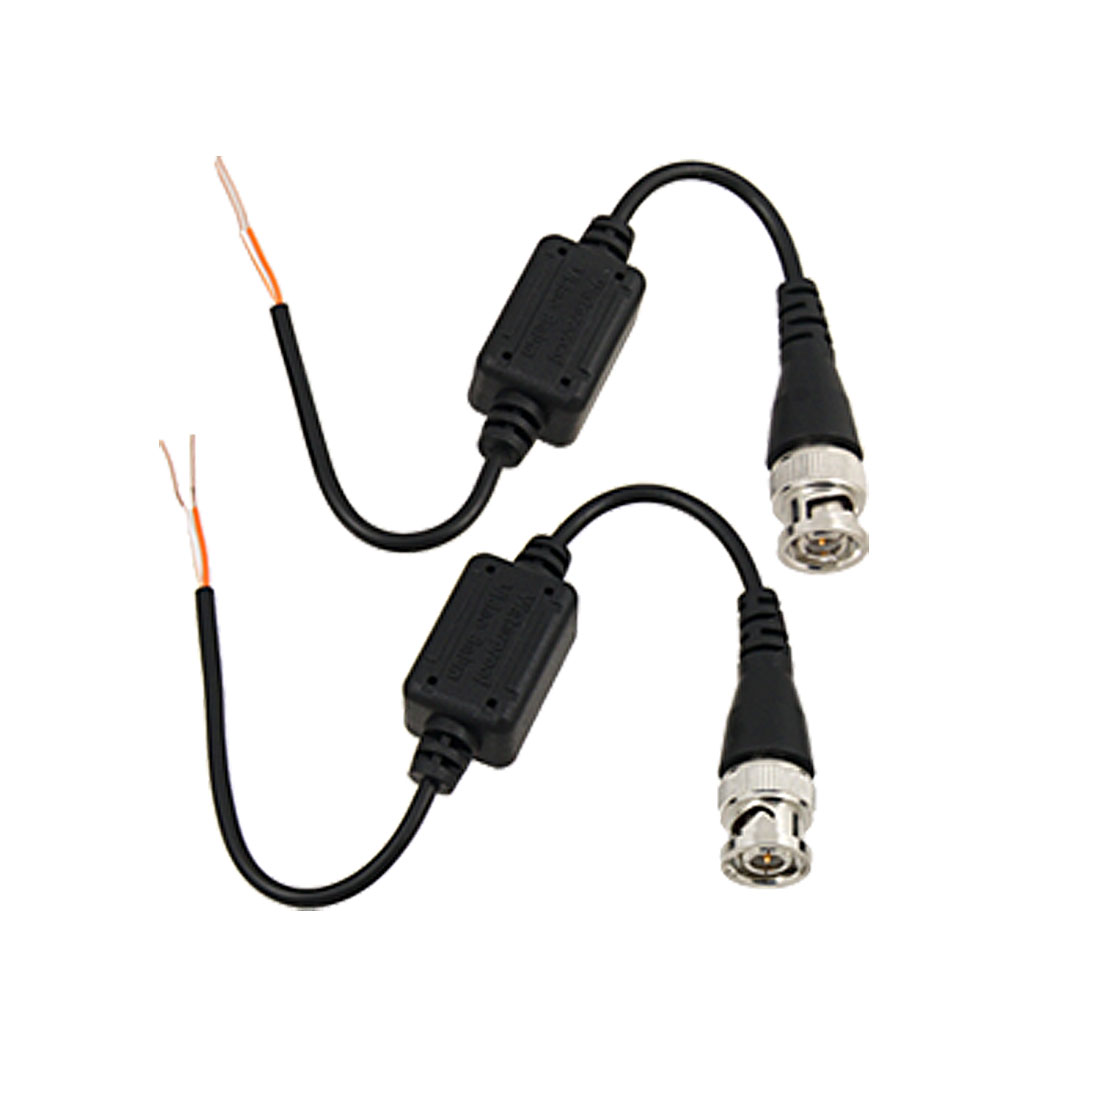 50pcs of LTS LTAB1015 Single Channel Passive Video Balun in Pairs 